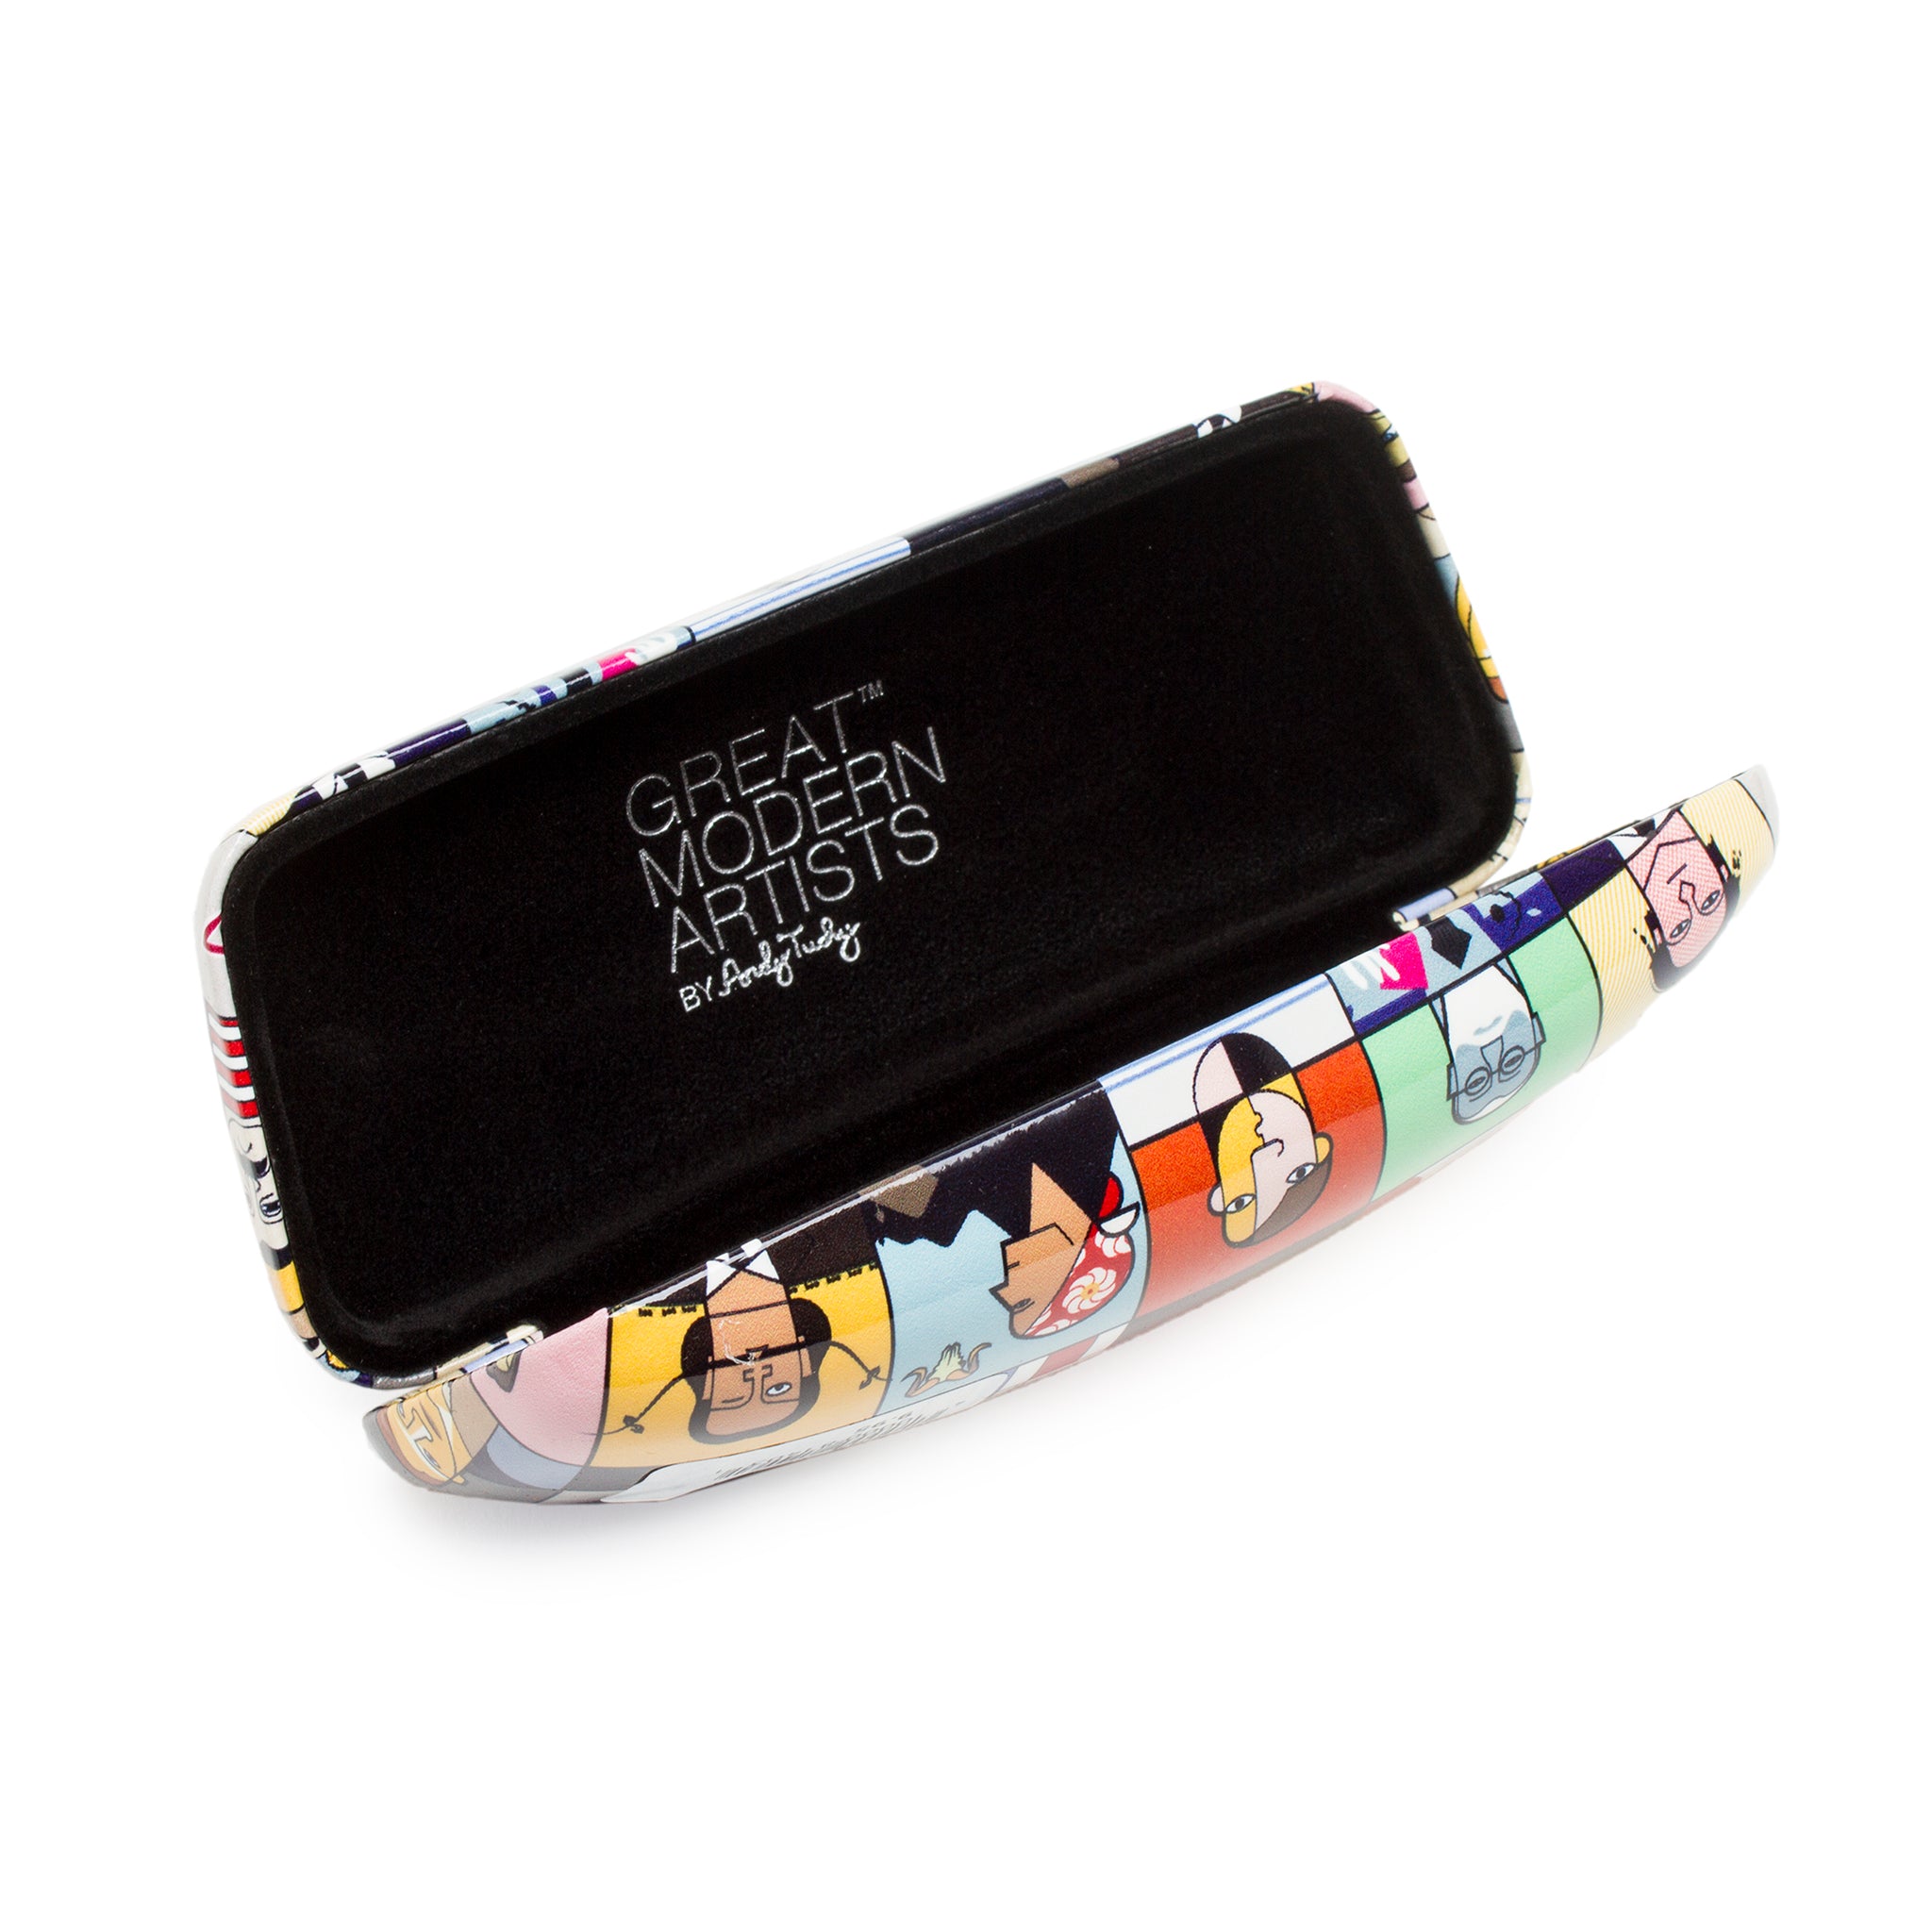 Great Modern Artists Pencil Case - Getty Museum Store